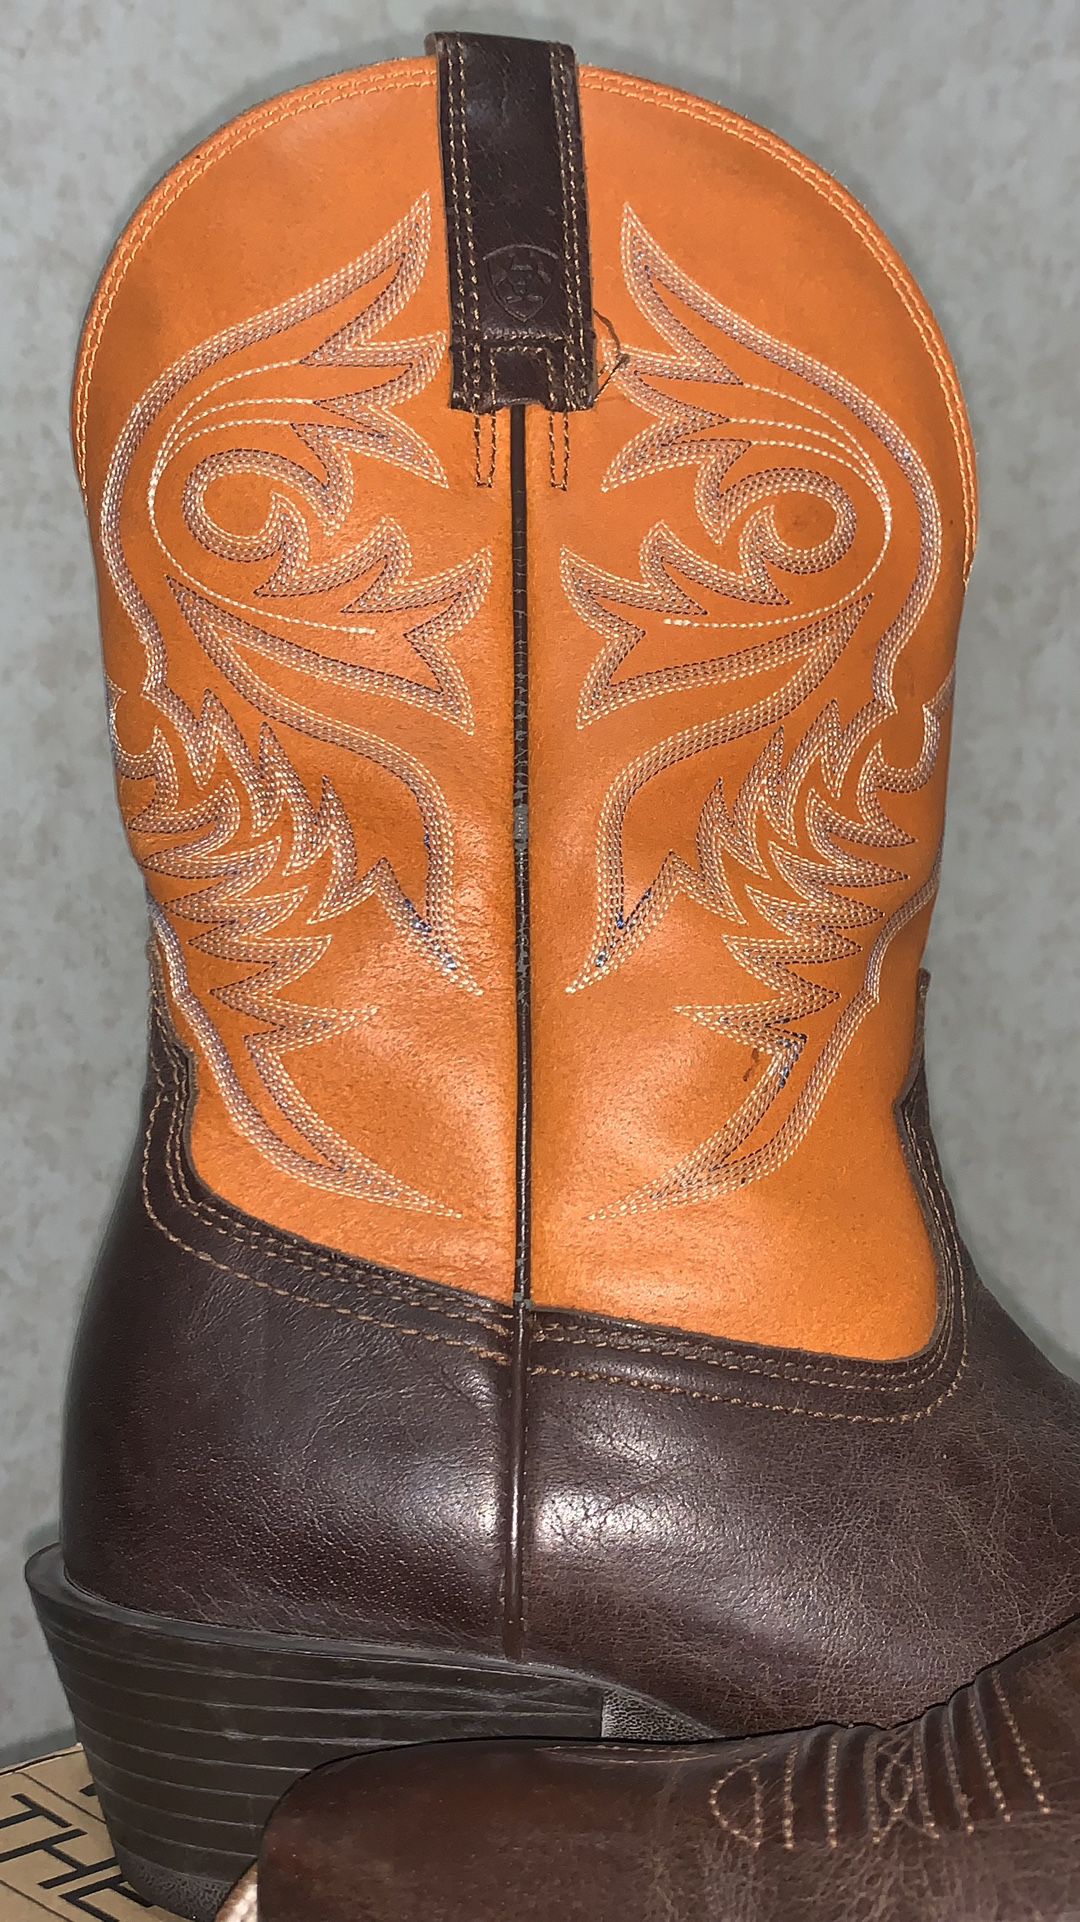 12 D Size Ariat Boots for Sale in San Antonio, TX - OfferUp